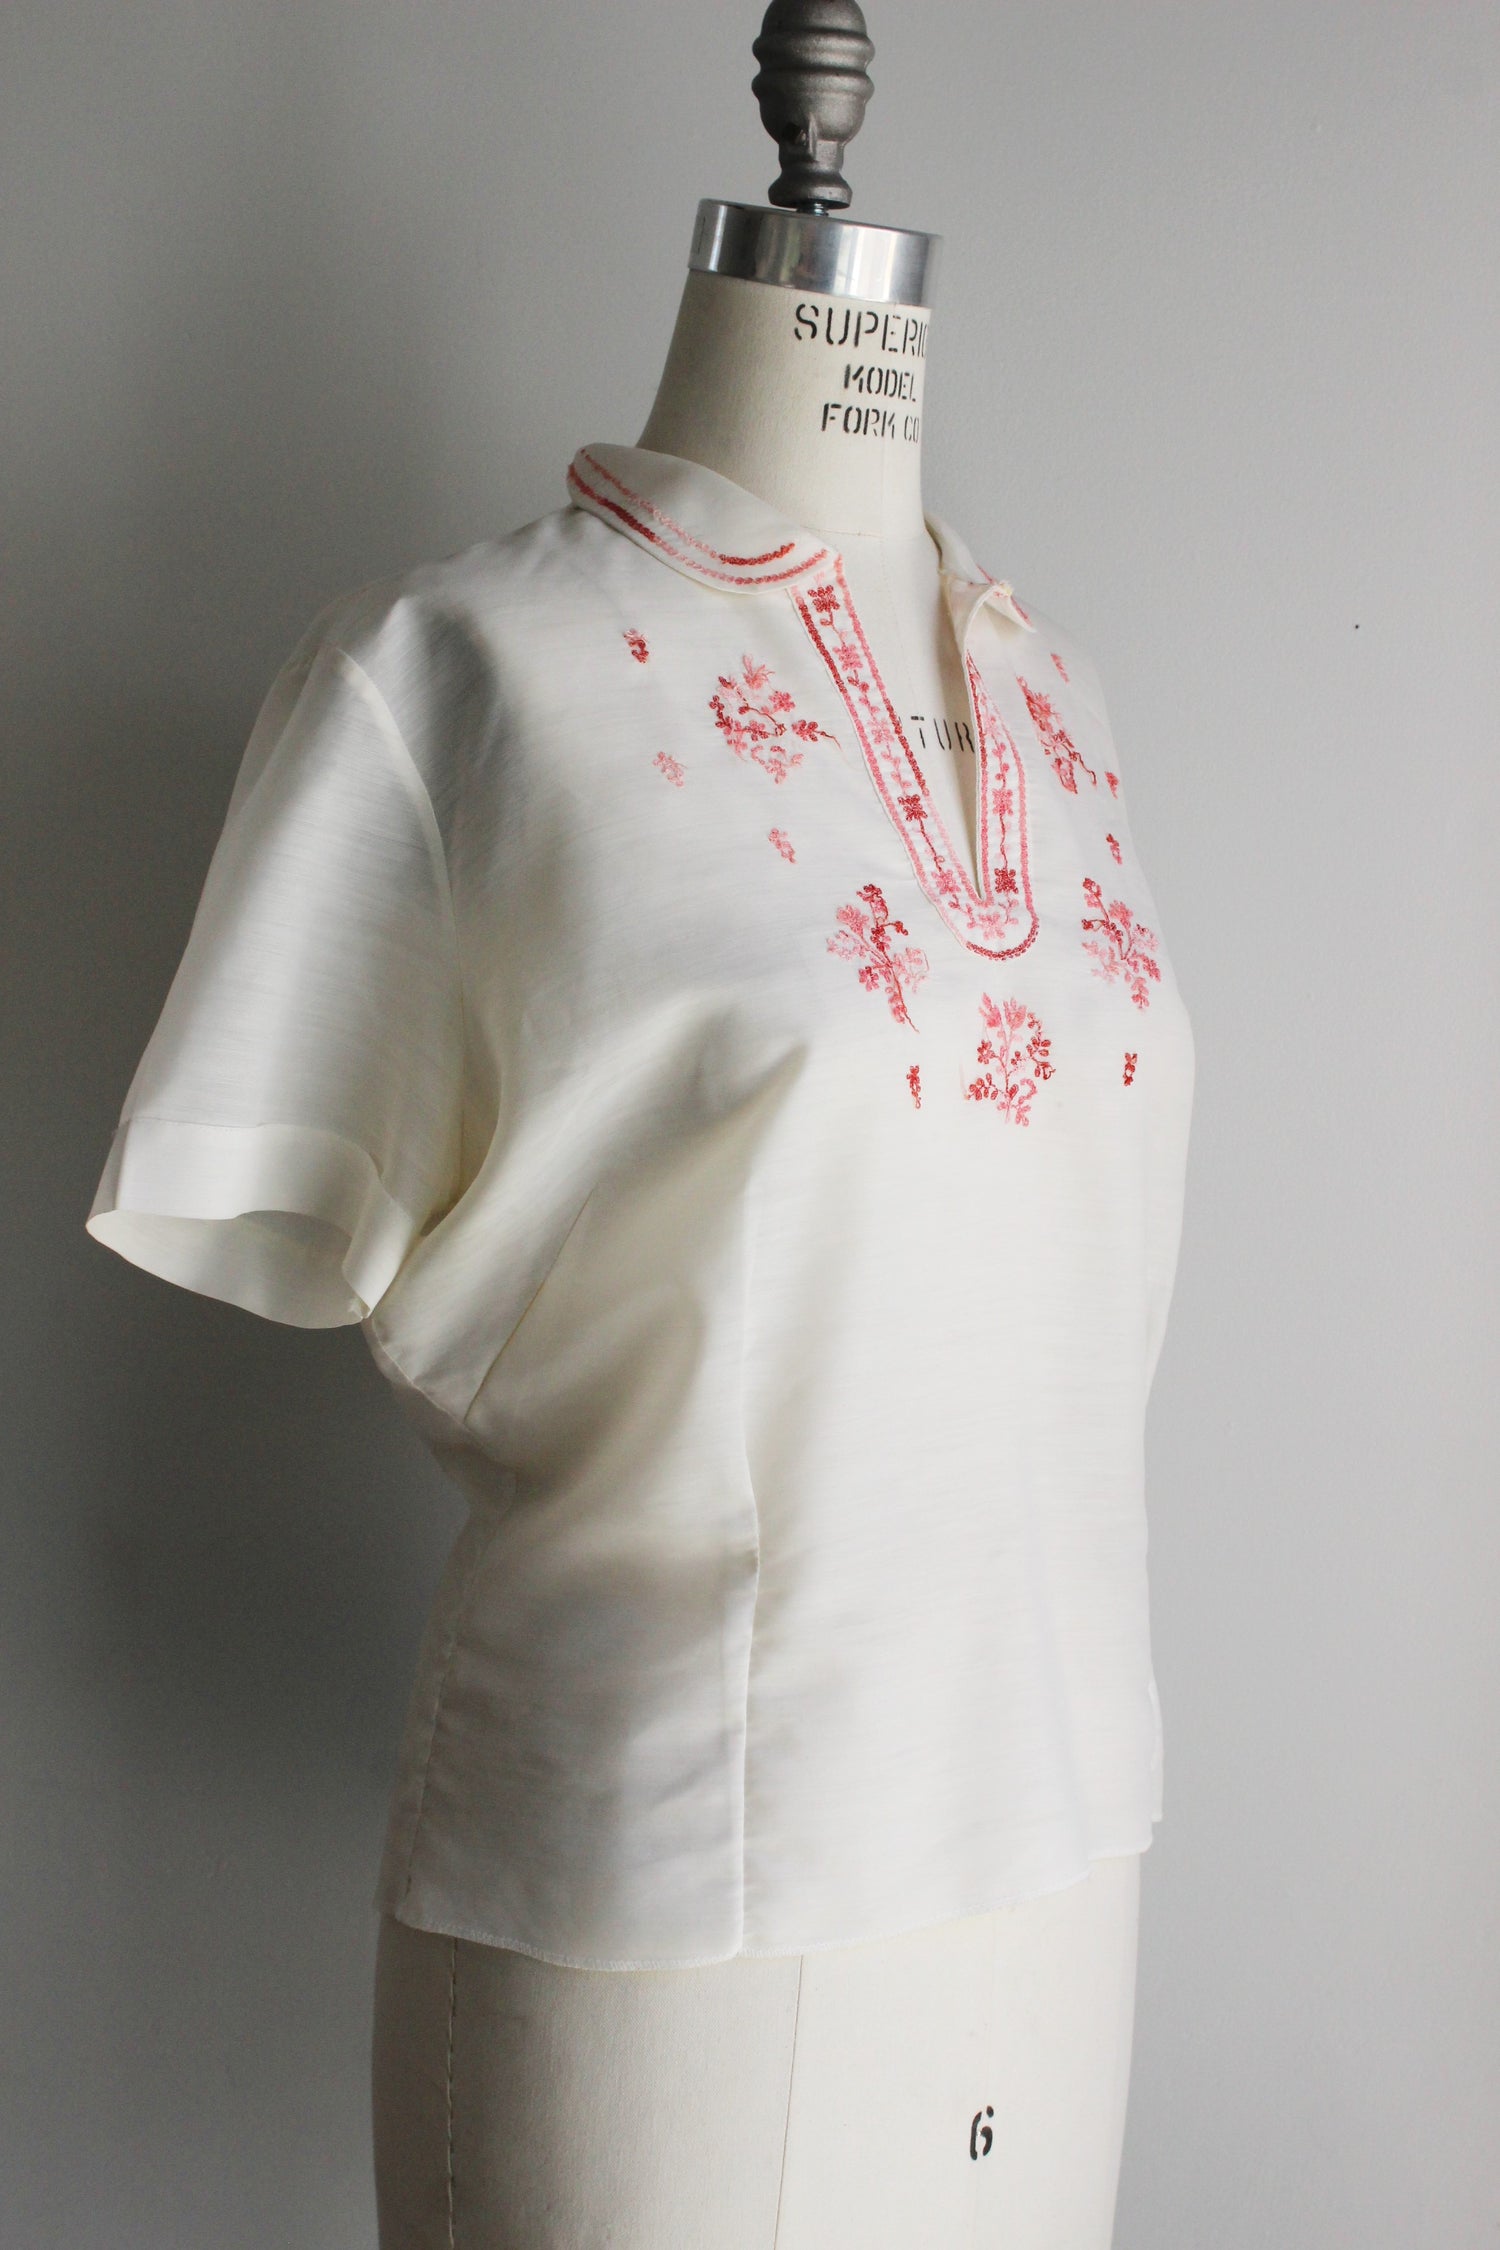 Vintage 1960s Embroidered Peasant Blouse